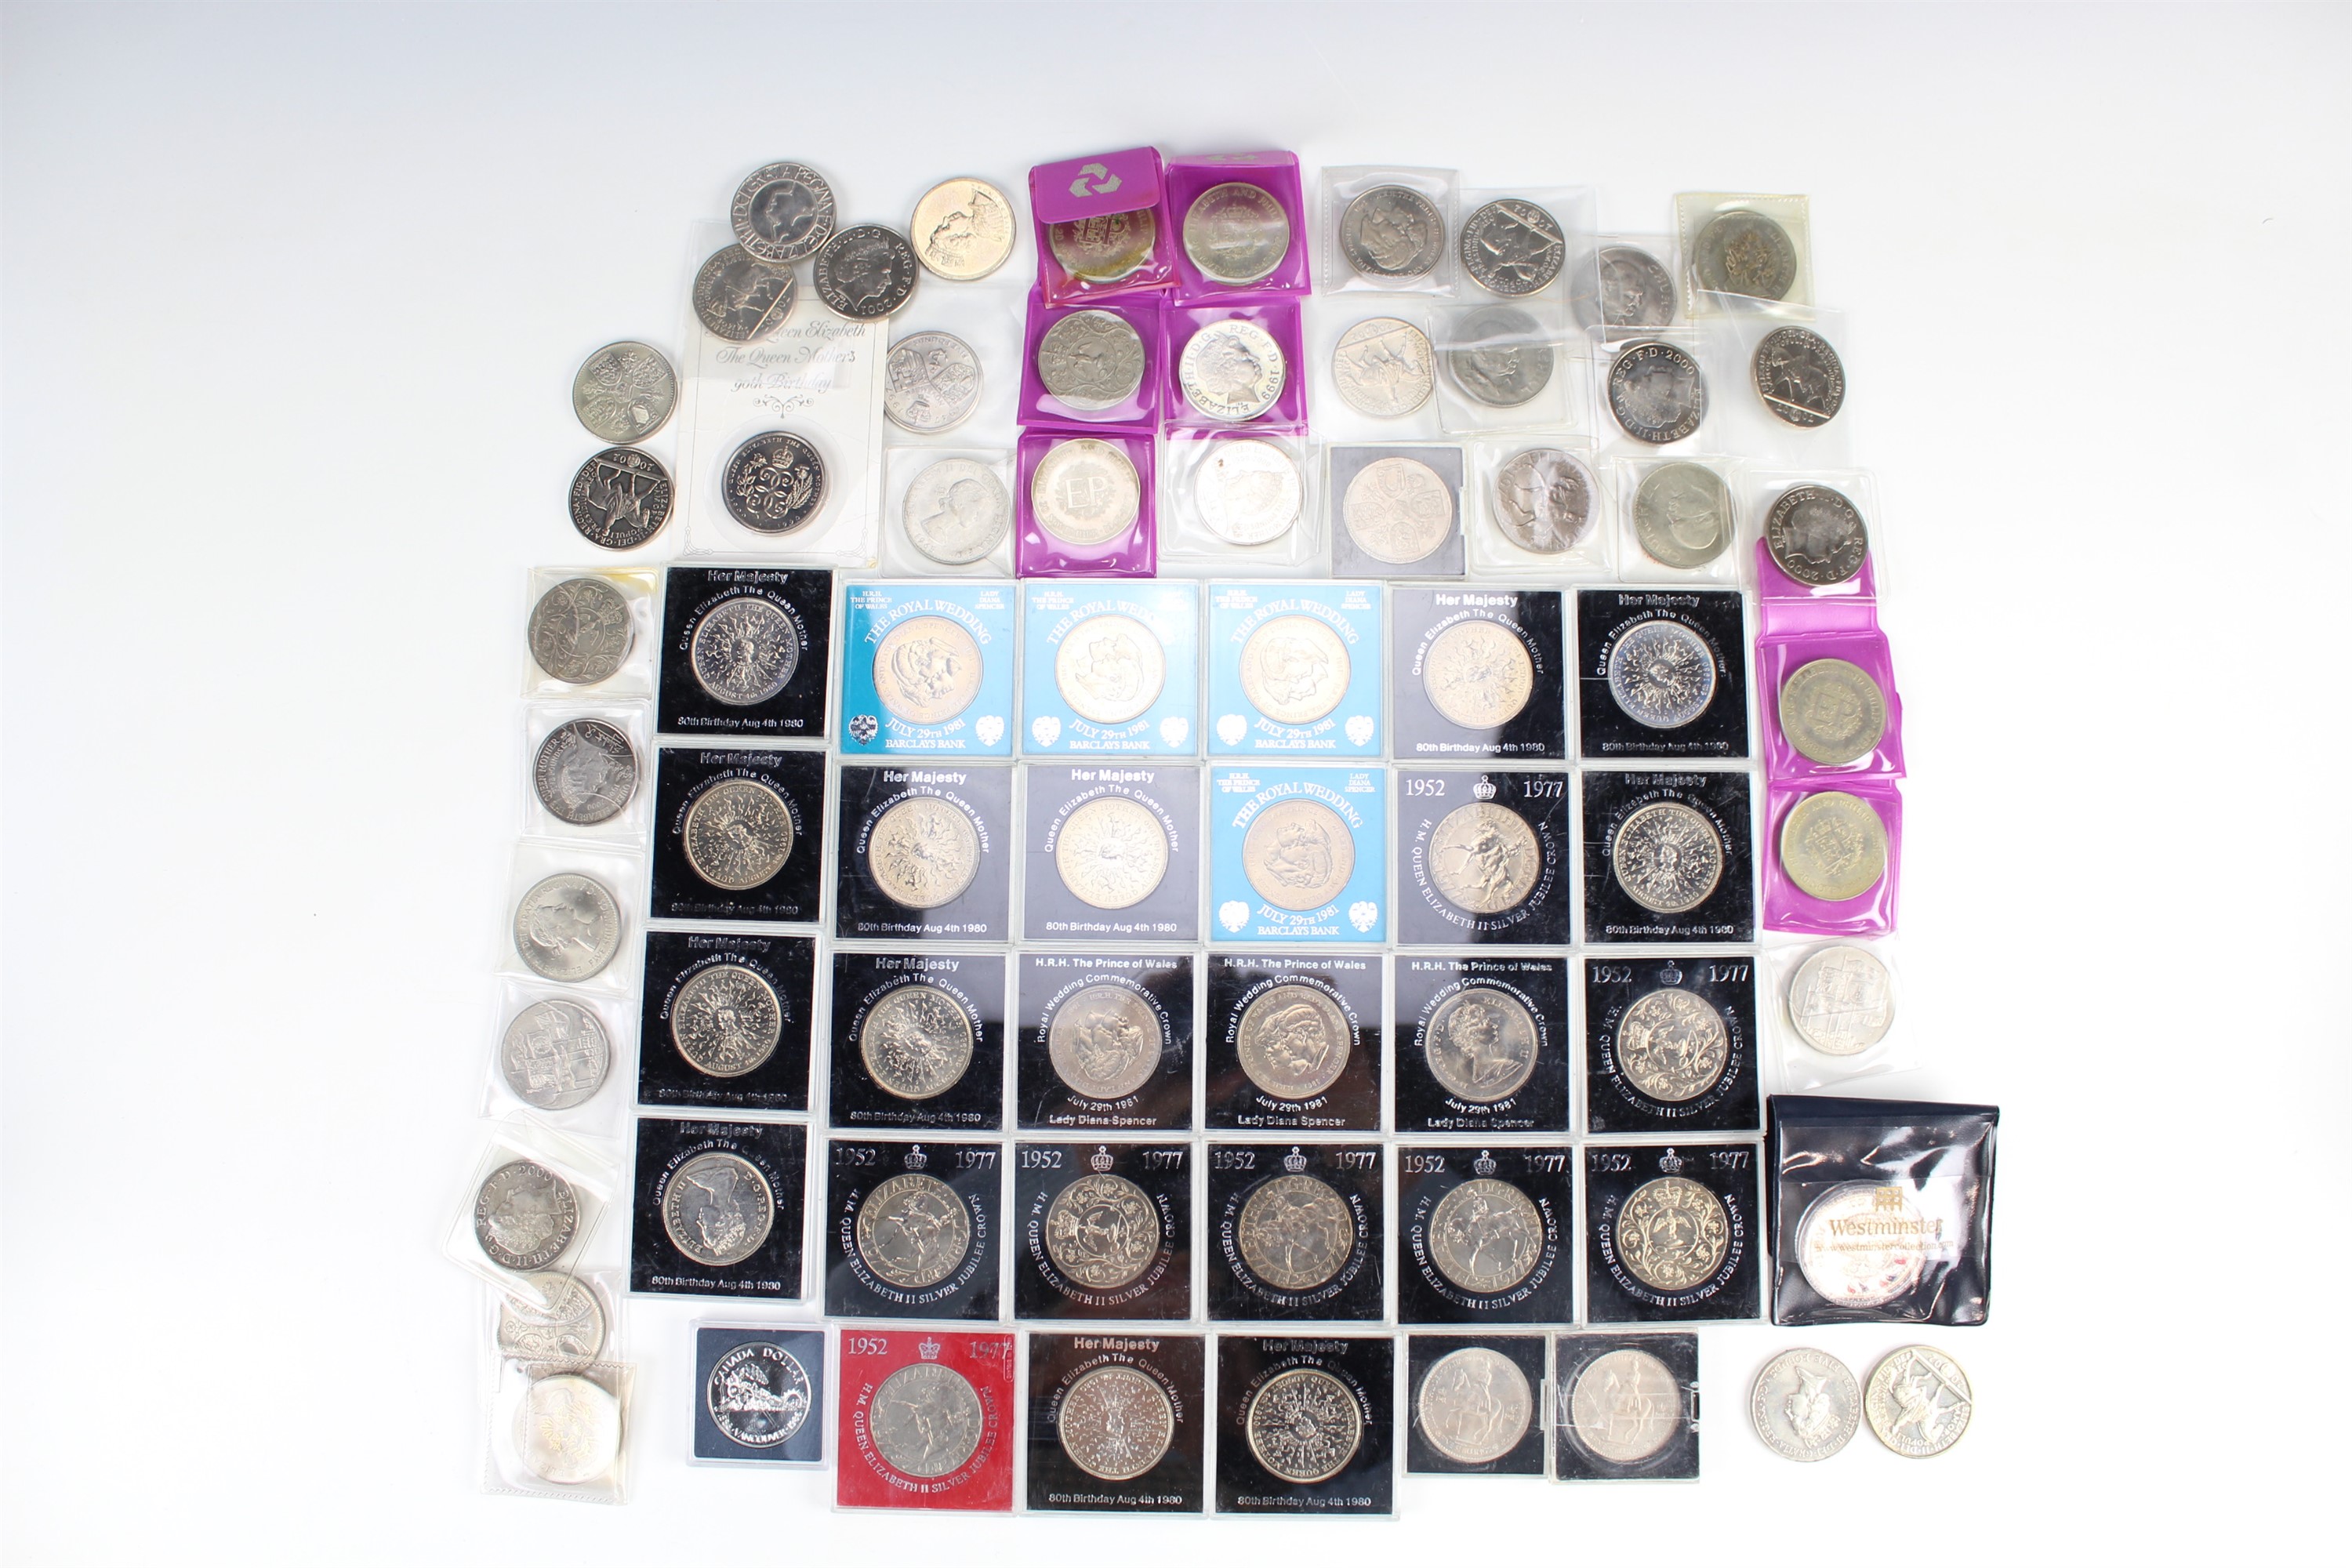 A 1986 silver centenary "Canada Dollar", together with a large quantity of commemorative coins